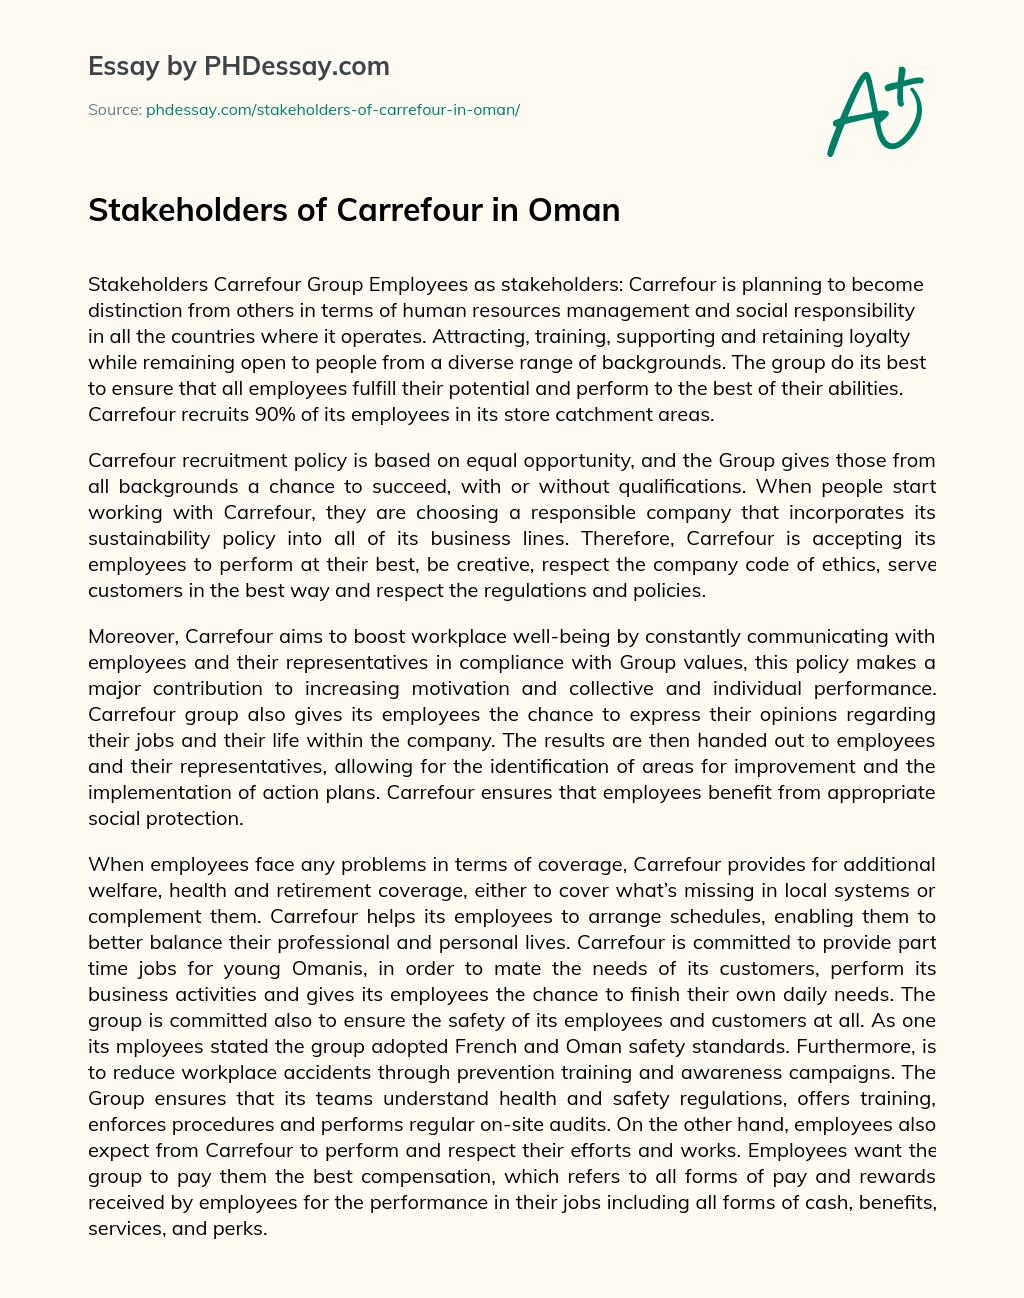 Stakeholders of Carrefour in Oman essay